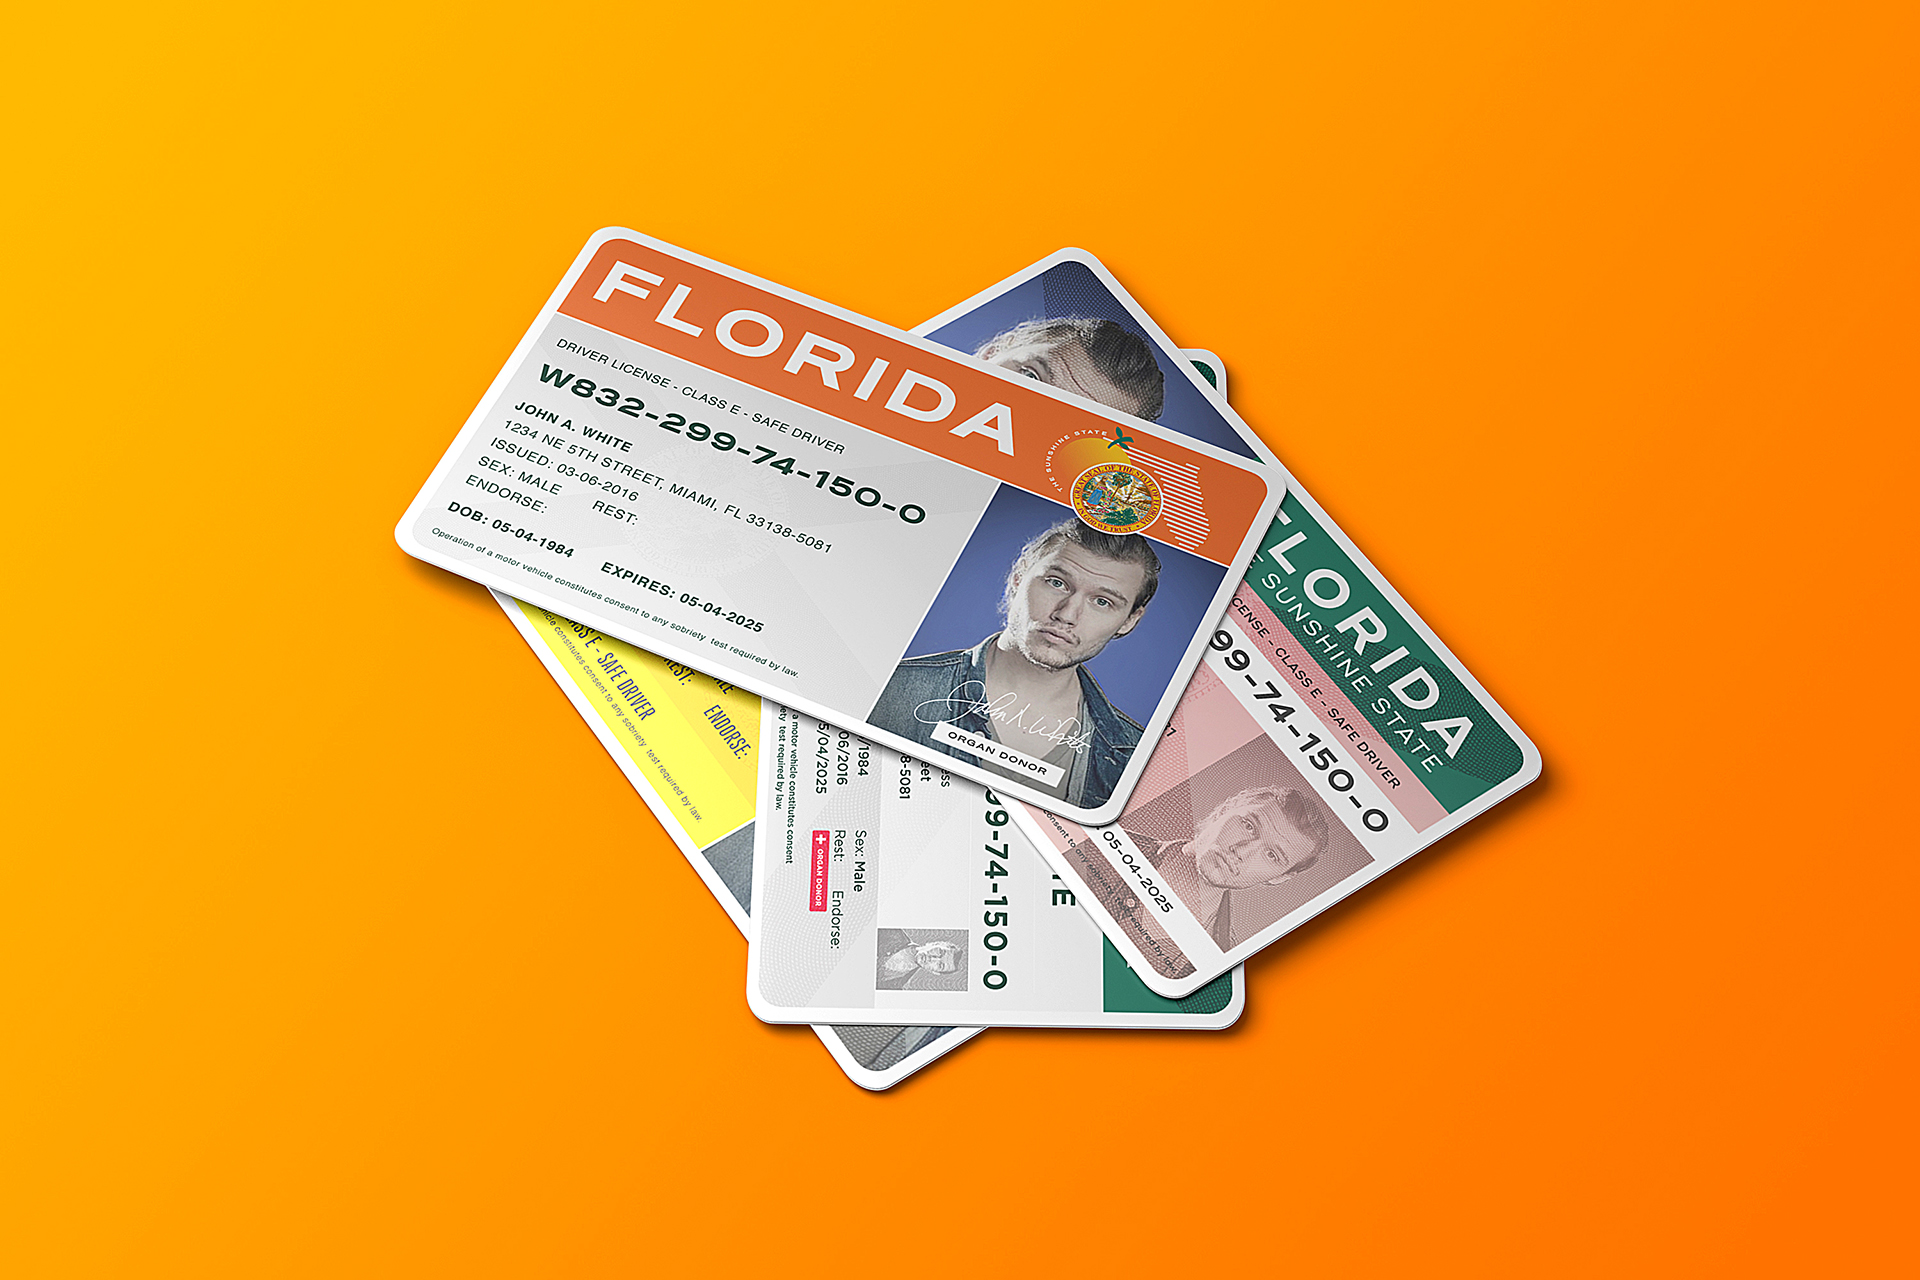 florida department of drivers license check